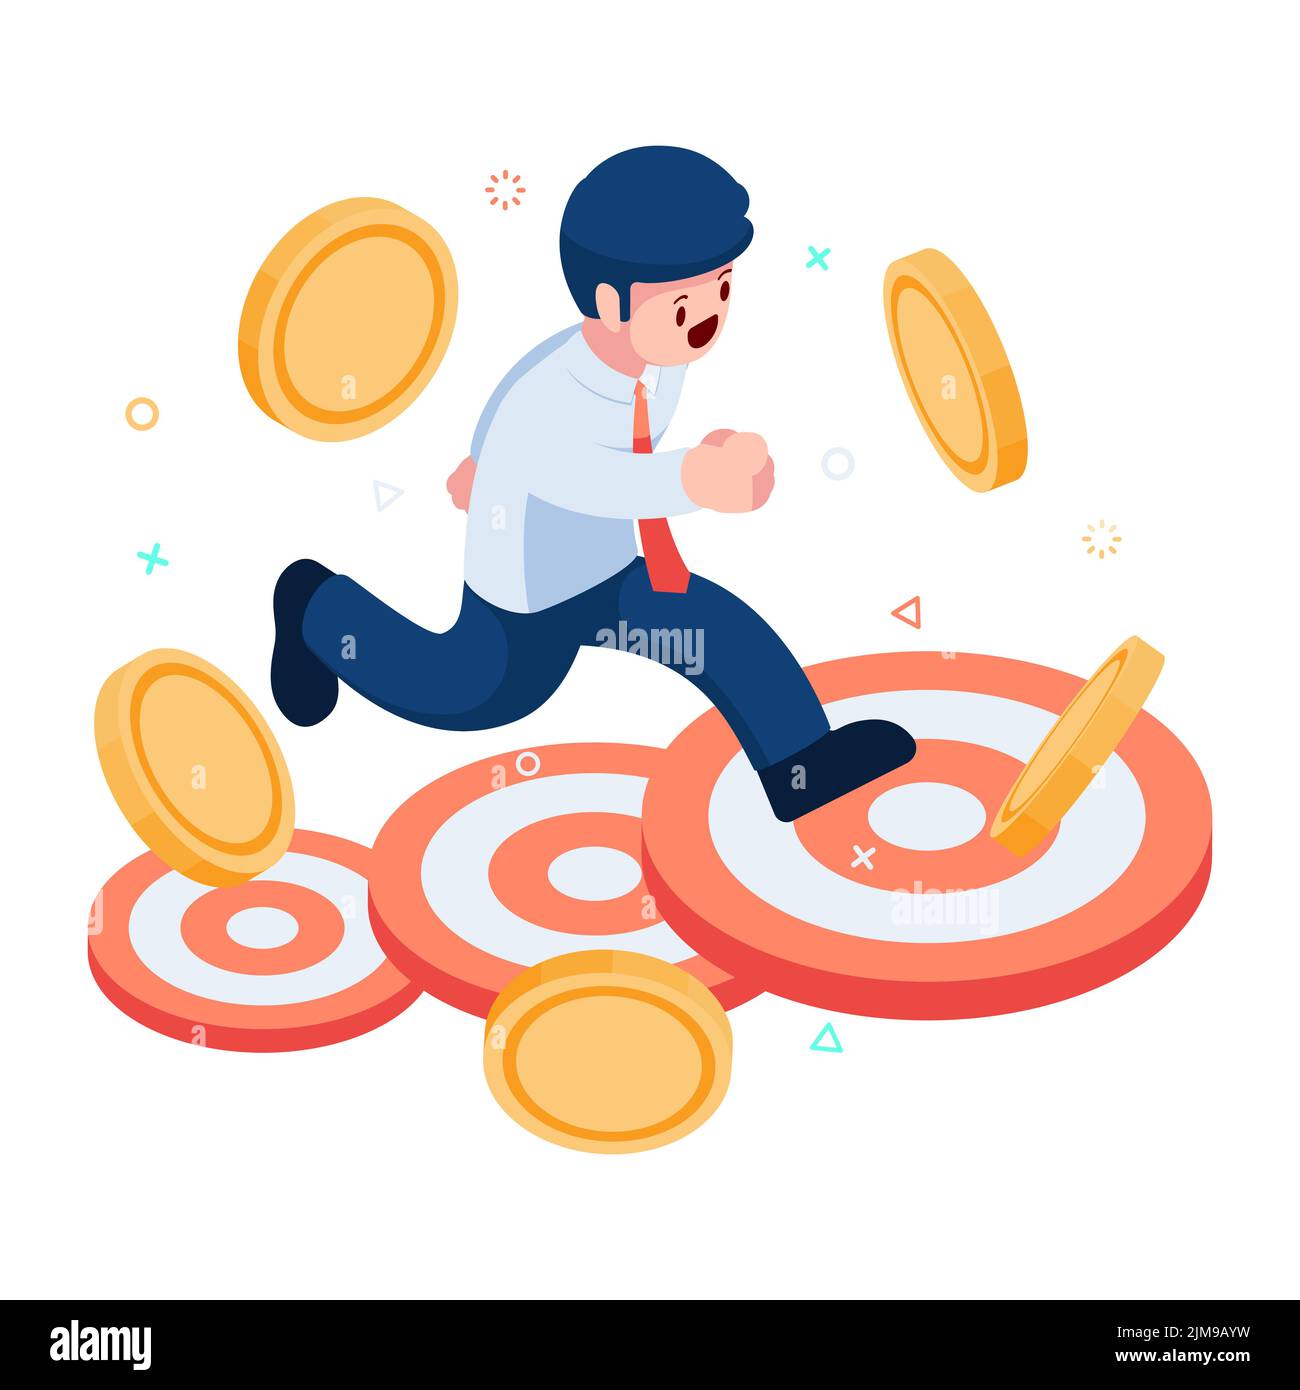 Flat 3d Isometric Businessman Jumping to The Higher Target. Business Success and Target Achievement Concept. Stock Vector